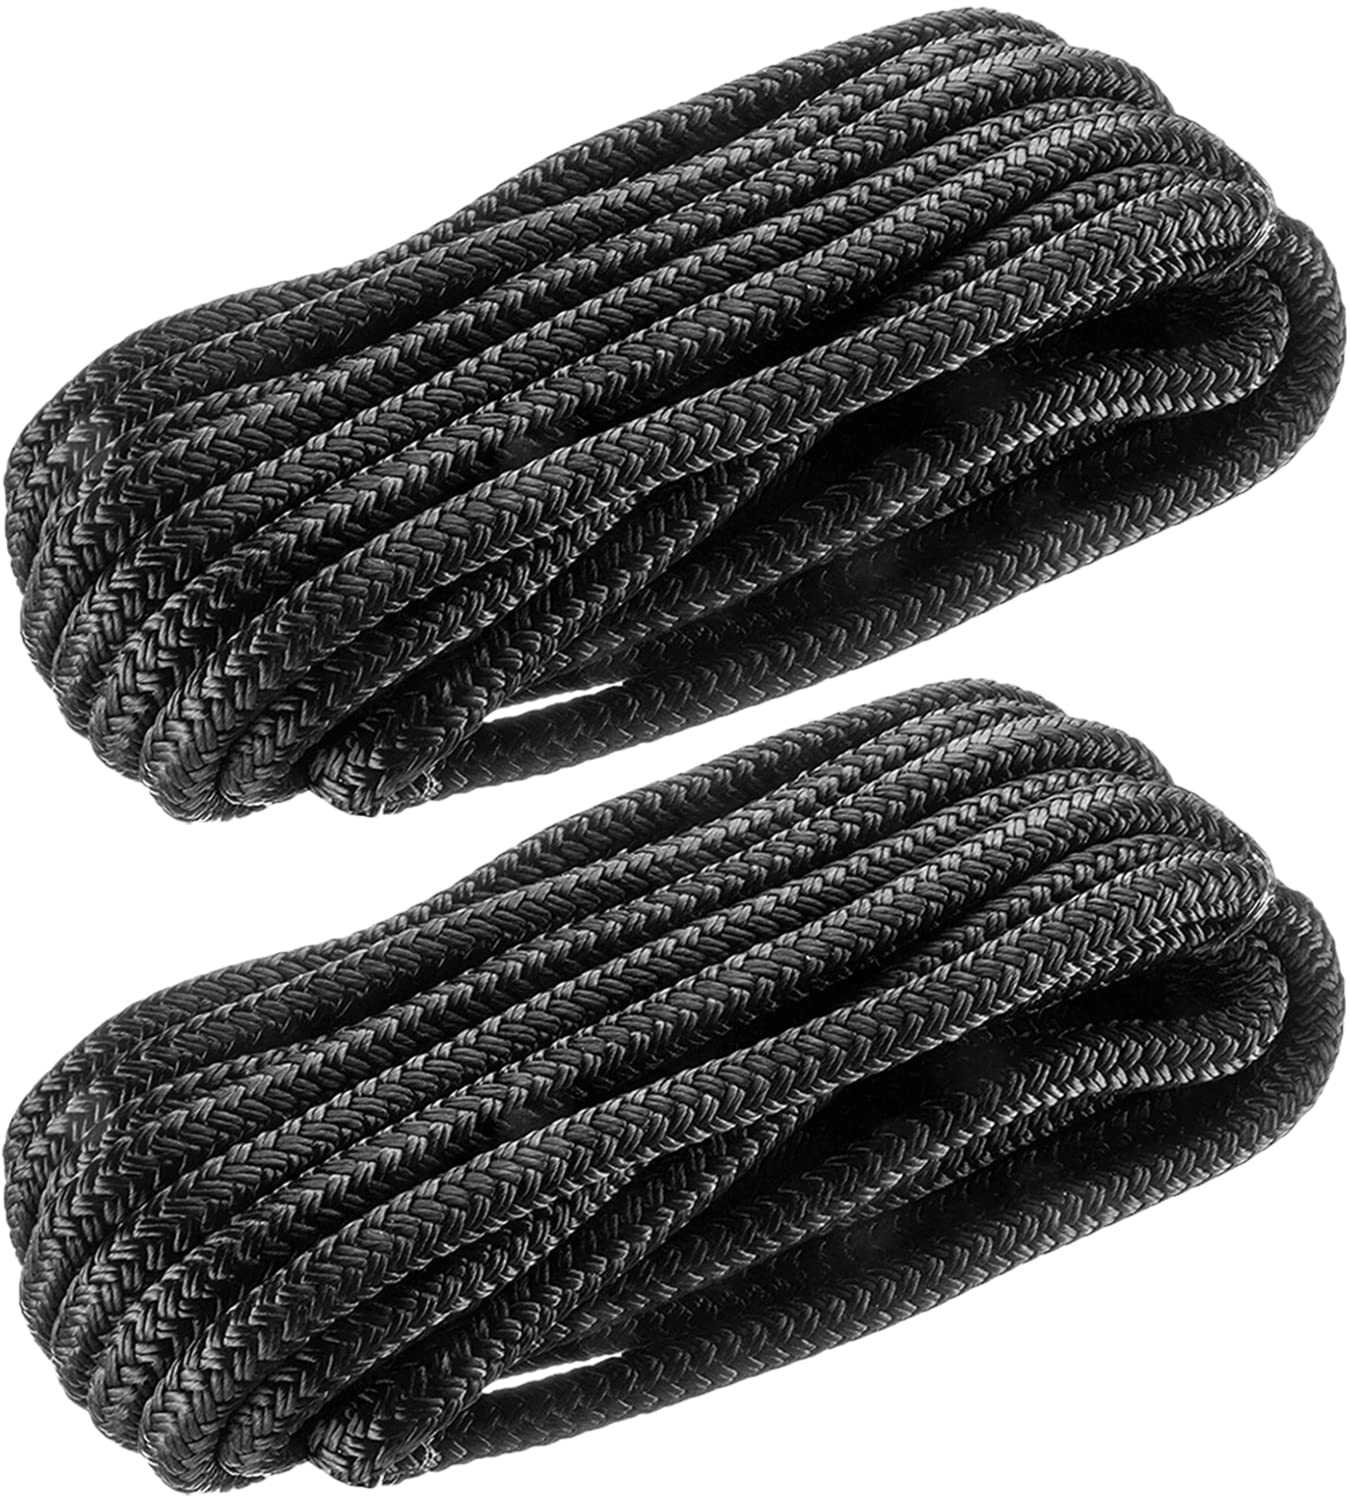 J-FM TWNTHSD Boat Dock Lines: 3/8 x 20' Double Braided Nylon Dock Line  Marine-Grade Dock Lines for Boats Pre-Spliced with a 12 Loop Boat Lines  Dock Rope Premium Marine Rope - Black